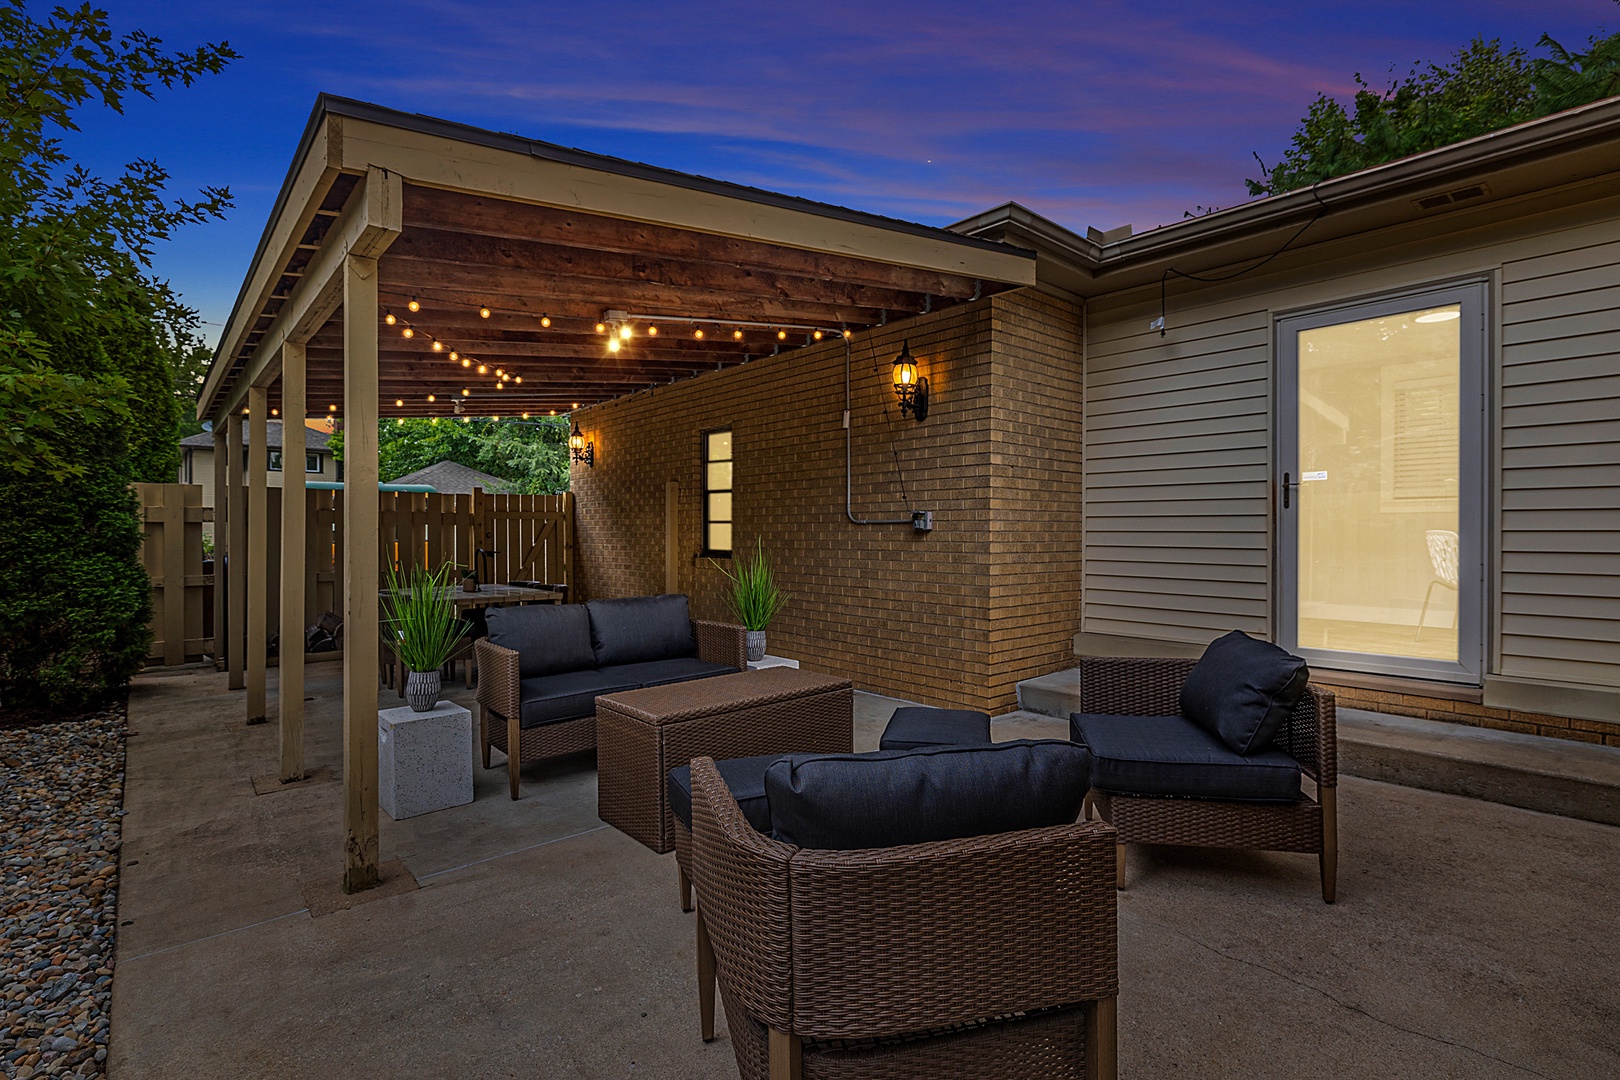 Our back patio is well lit for night time entertaining.